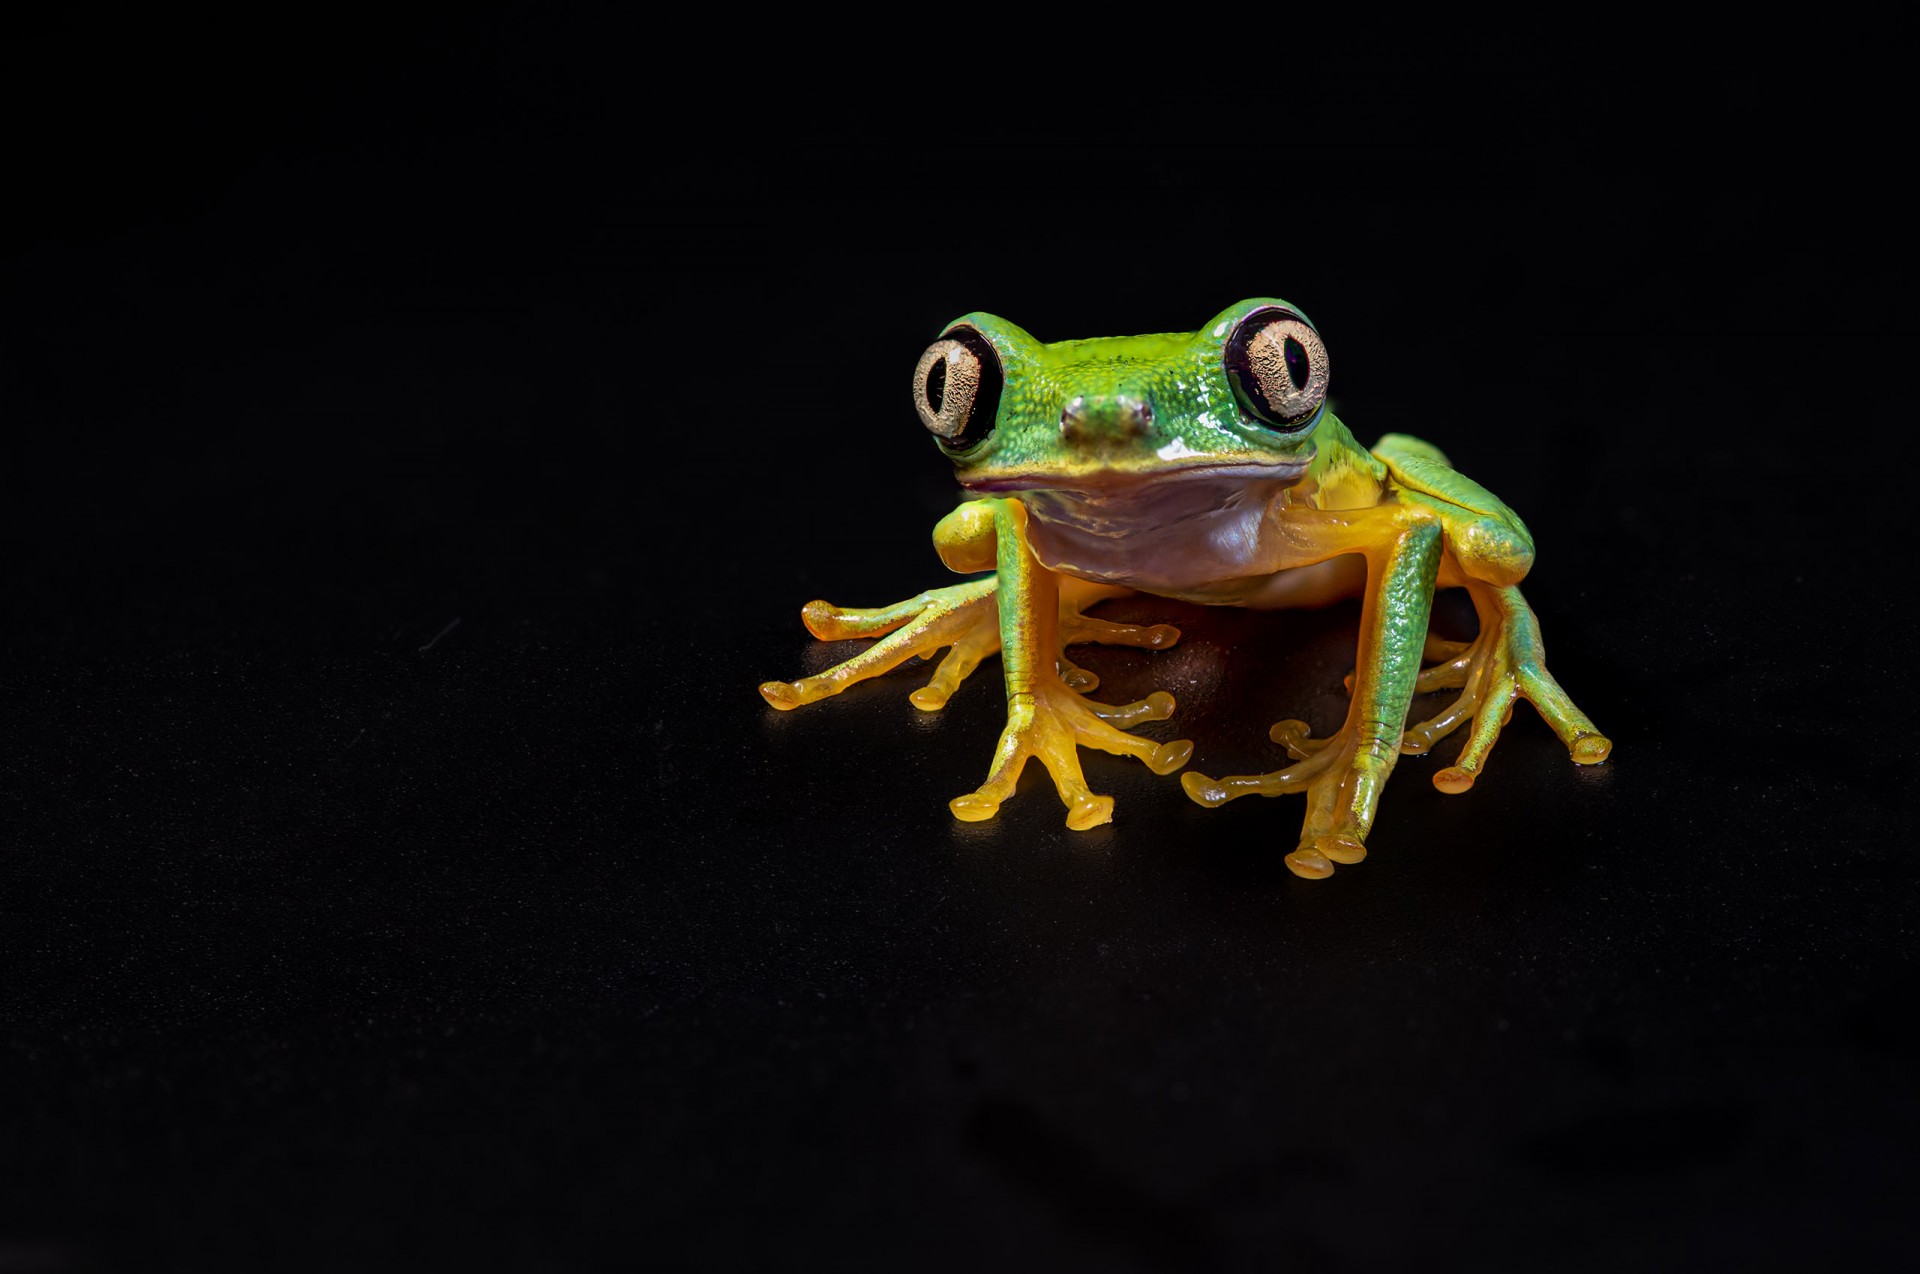 Image of a gold and green frog with a black background.